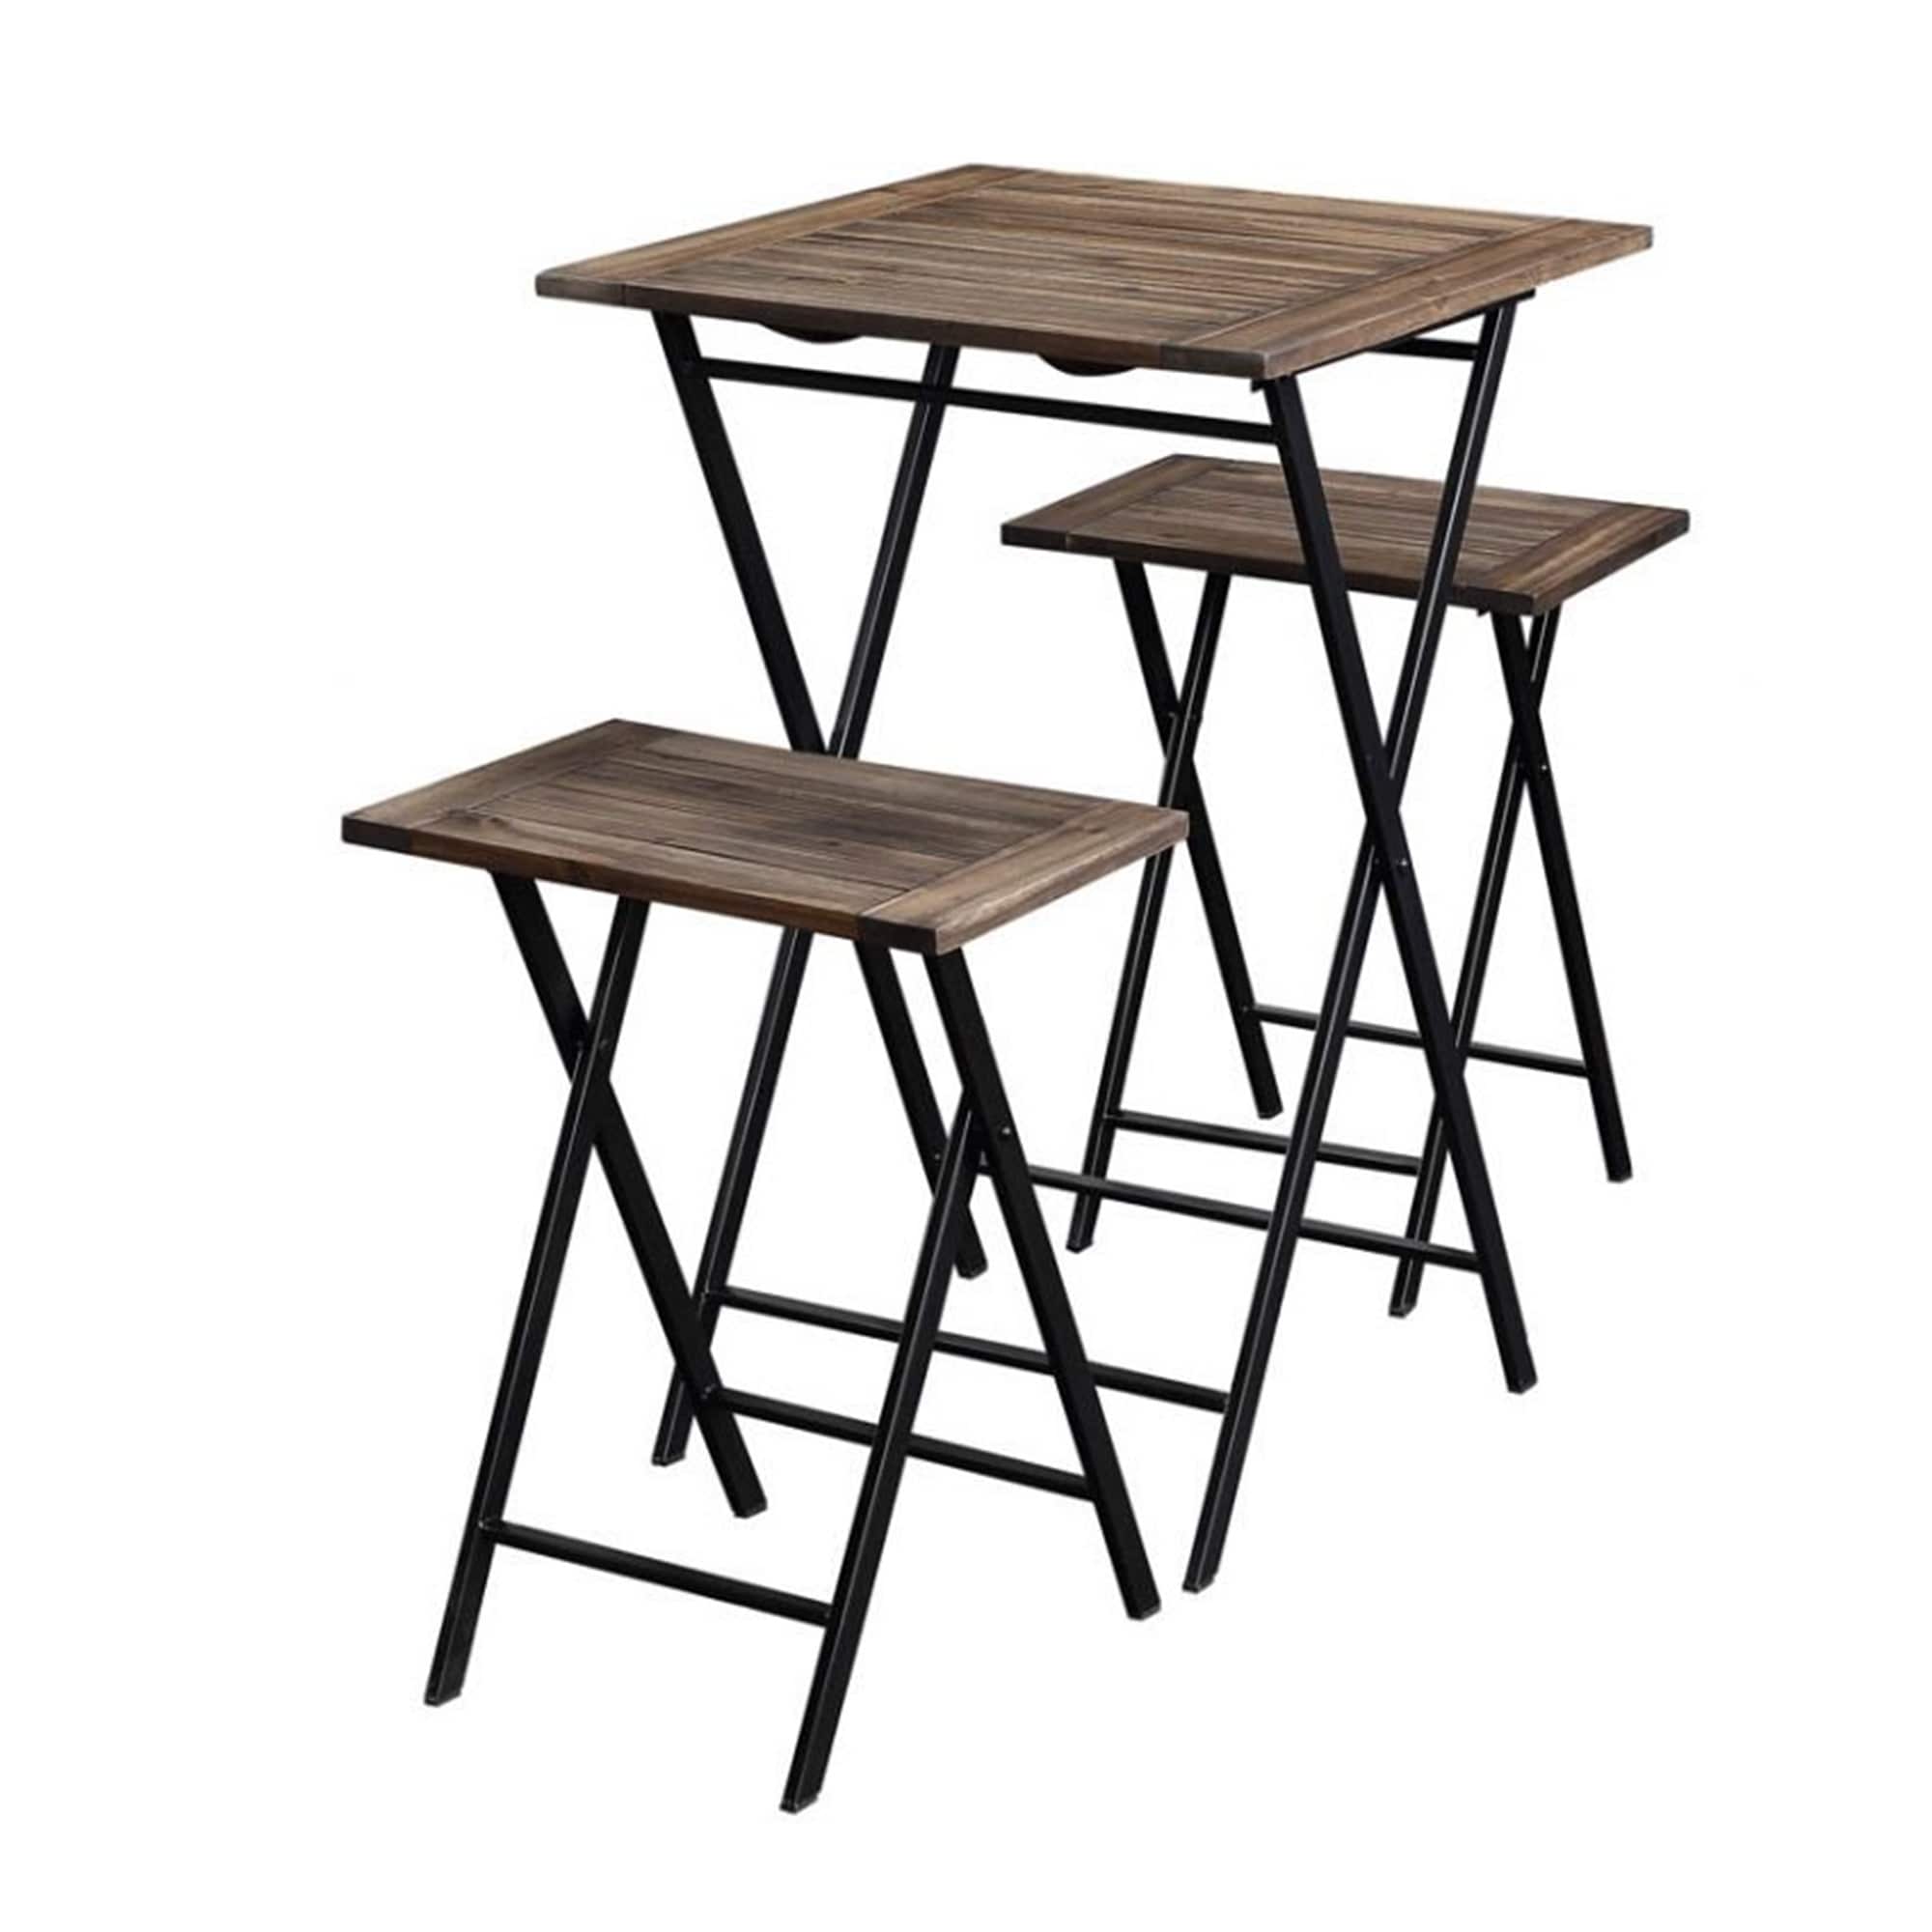 3 Piece Foldable Wood And Metal Dining Set With X Frame Leg brown And Black